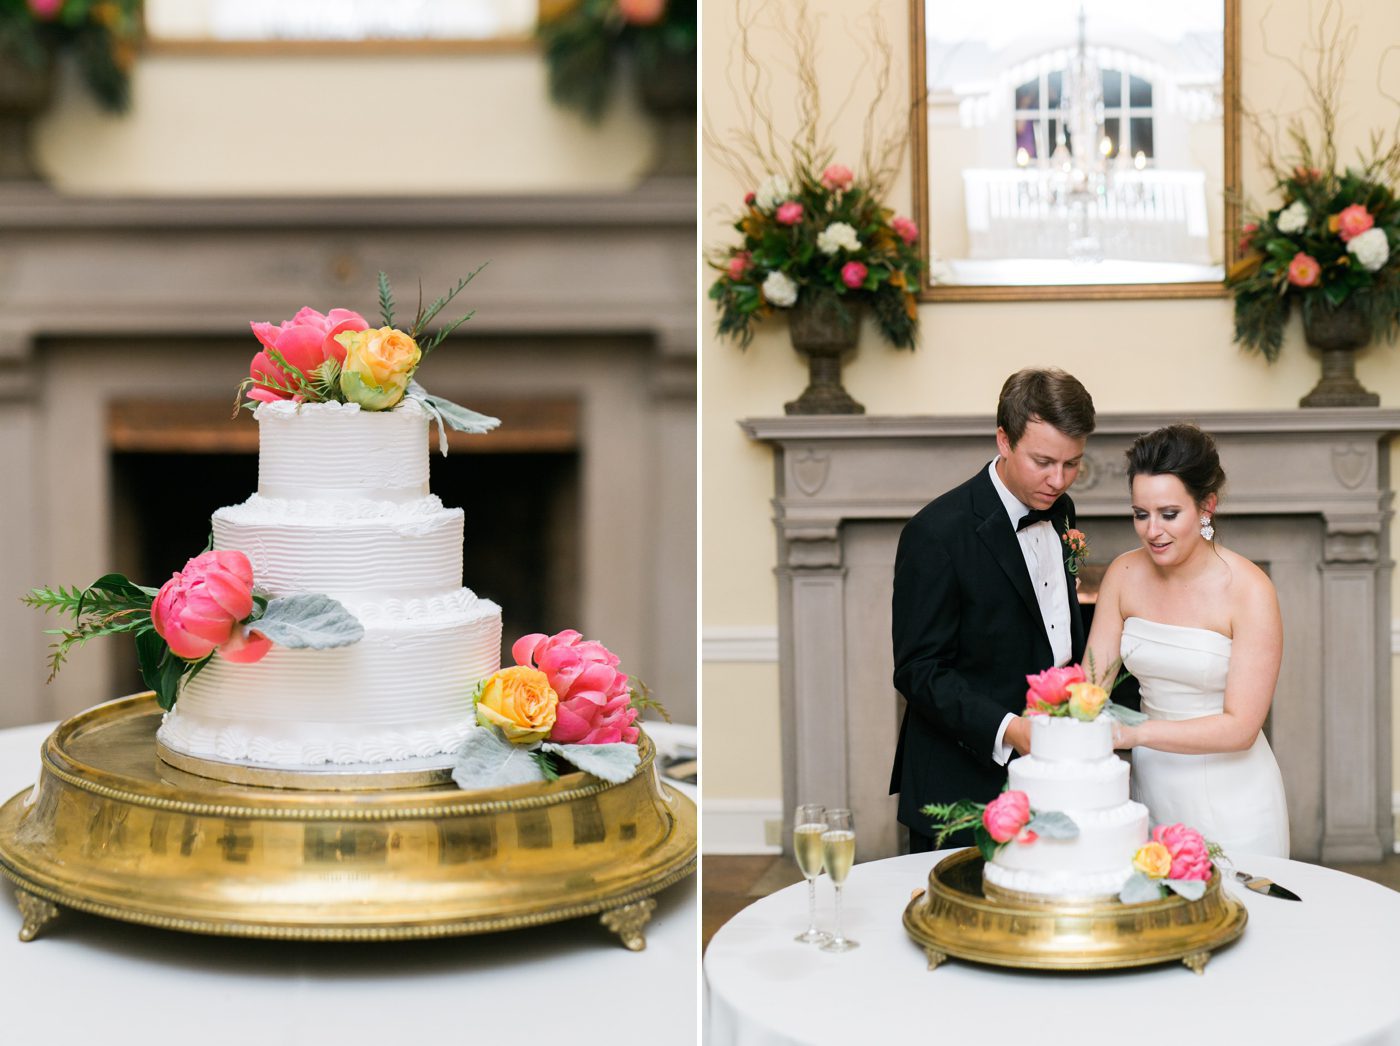 Bride and groom cutting the cake at Drengaelen House. Photo by Charleston wedding photographer Catherine Ann Photography